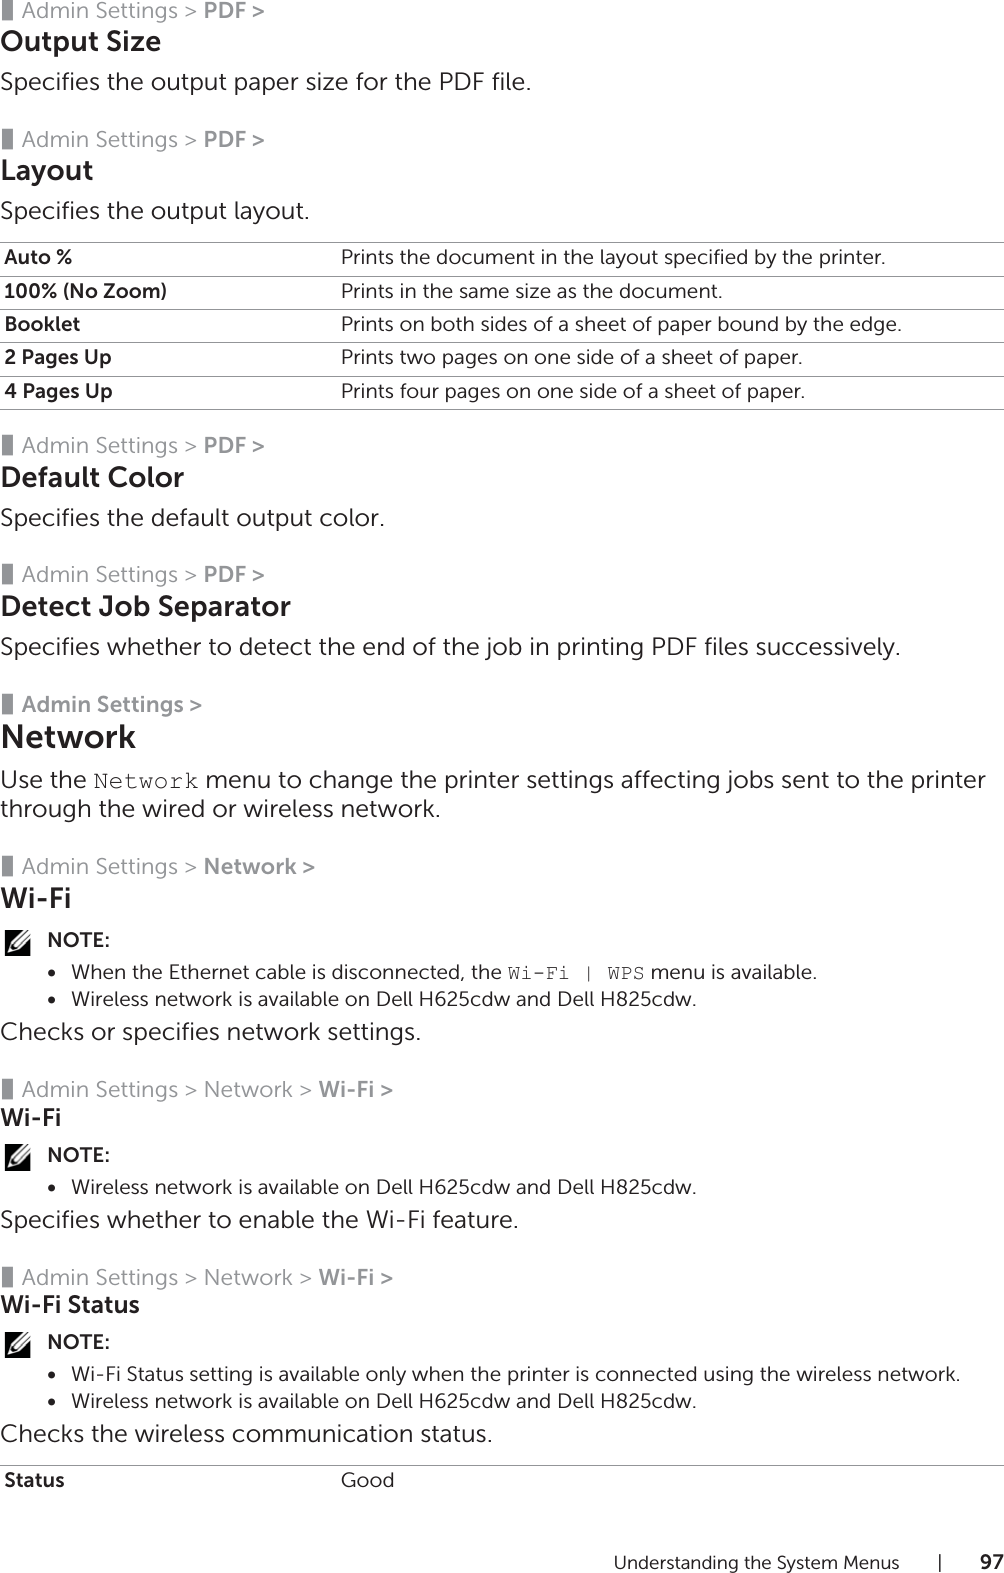 Understanding the System Menus |97❚Admin Settings &gt; PDF &gt;Output SizeSpecifies the output paper size for the PDF file.❚Admin Settings &gt; PDF &gt;LayoutSpecifies the output layout.❚Admin Settings &gt; PDF &gt;Default ColorSpecifies the default output color.❚Admin Settings &gt; PDF &gt;Detect Job SeparatorSpecifies whether to detect the end of the job in printing PDF files successively.❚Admin Settings &gt;NetworkUse the Network menu to change the printer settings affecting jobs sent to the printer through the wired or wireless network.❚Admin Settings &gt; Network &gt;Wi-FiNOTE:•When the Ethernet cable is disconnected, the Wi-Fi | WPS menu is available.•Wireless network is available on Dell H625cdw and Dell H825cdw.Checks or specifies network settings.❚Admin Settings &gt; Network &gt; Wi-Fi &gt;Wi-FiNOTE:•Wireless network is available on Dell H625cdw and Dell H825cdw.Specifies whether to enable the Wi-Fi feature.❚Admin Settings &gt; Network &gt; Wi-Fi &gt;Wi-Fi StatusNOTE:•Wi-Fi Status setting is available only when the printer is connected using the wireless network.•Wireless network is available on Dell H625cdw and Dell H825cdw.Checks the wireless communication status.Auto % Prints the document in the layout specified by the printer.100% (No Zoom) Prints in the same size as the document.Booklet Prints on both sides of a sheet of paper bound by the edge.2 Pages Up Prints two pages on one side of a sheet of paper.4 Pages Up Prints four pages on one side of a sheet of paper.Status Good